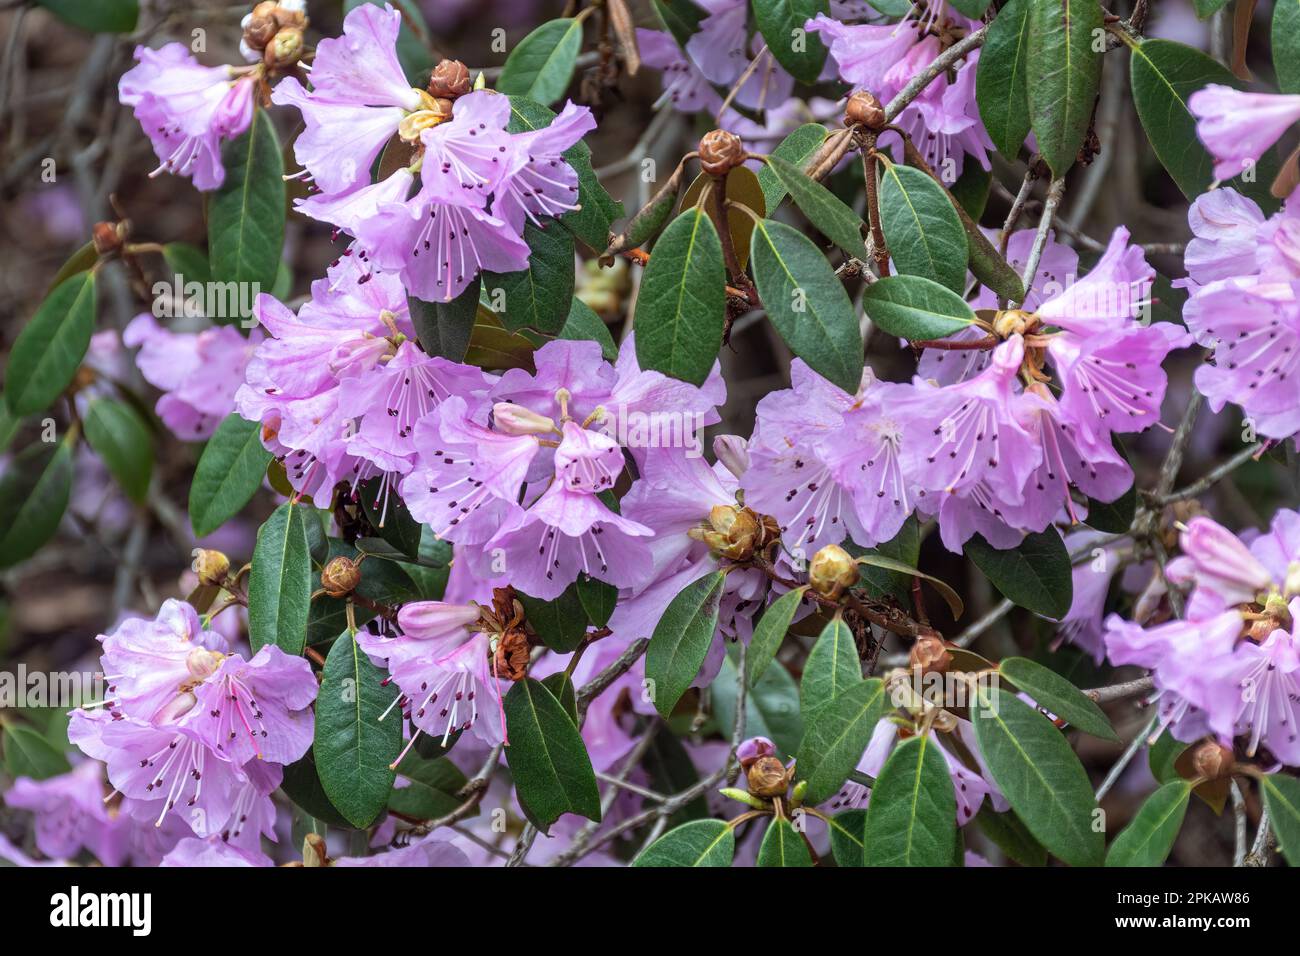 Mauve pink flowers or blooms on the shrub Rhododendron rubiginosum (subsection Heliolepida) during Spring or April, UK Stock Photo